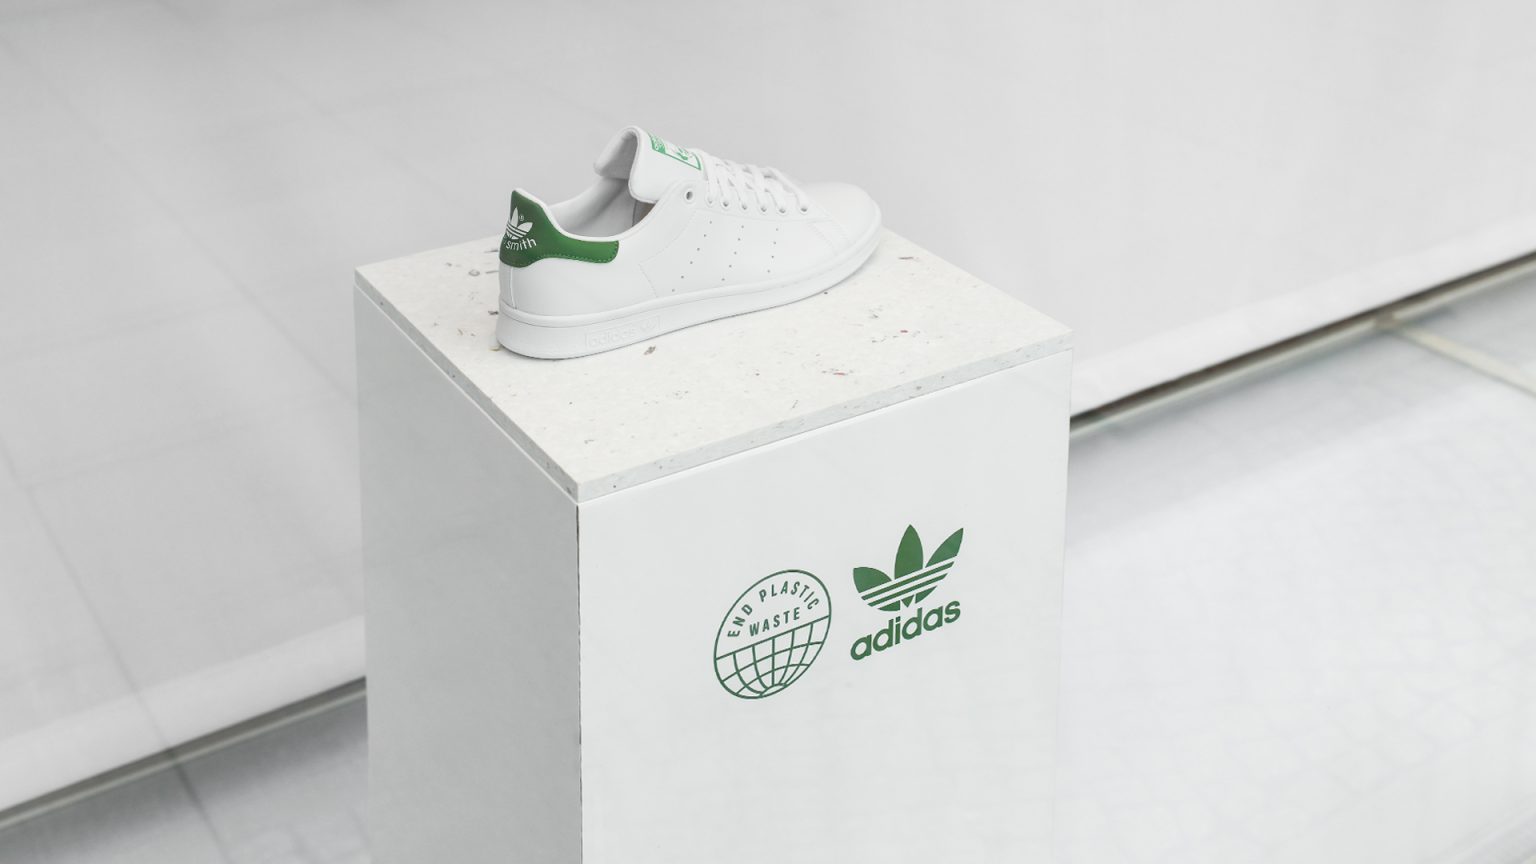 You can't spell 'sustainable' without 'S-T-A-N': The new adidas